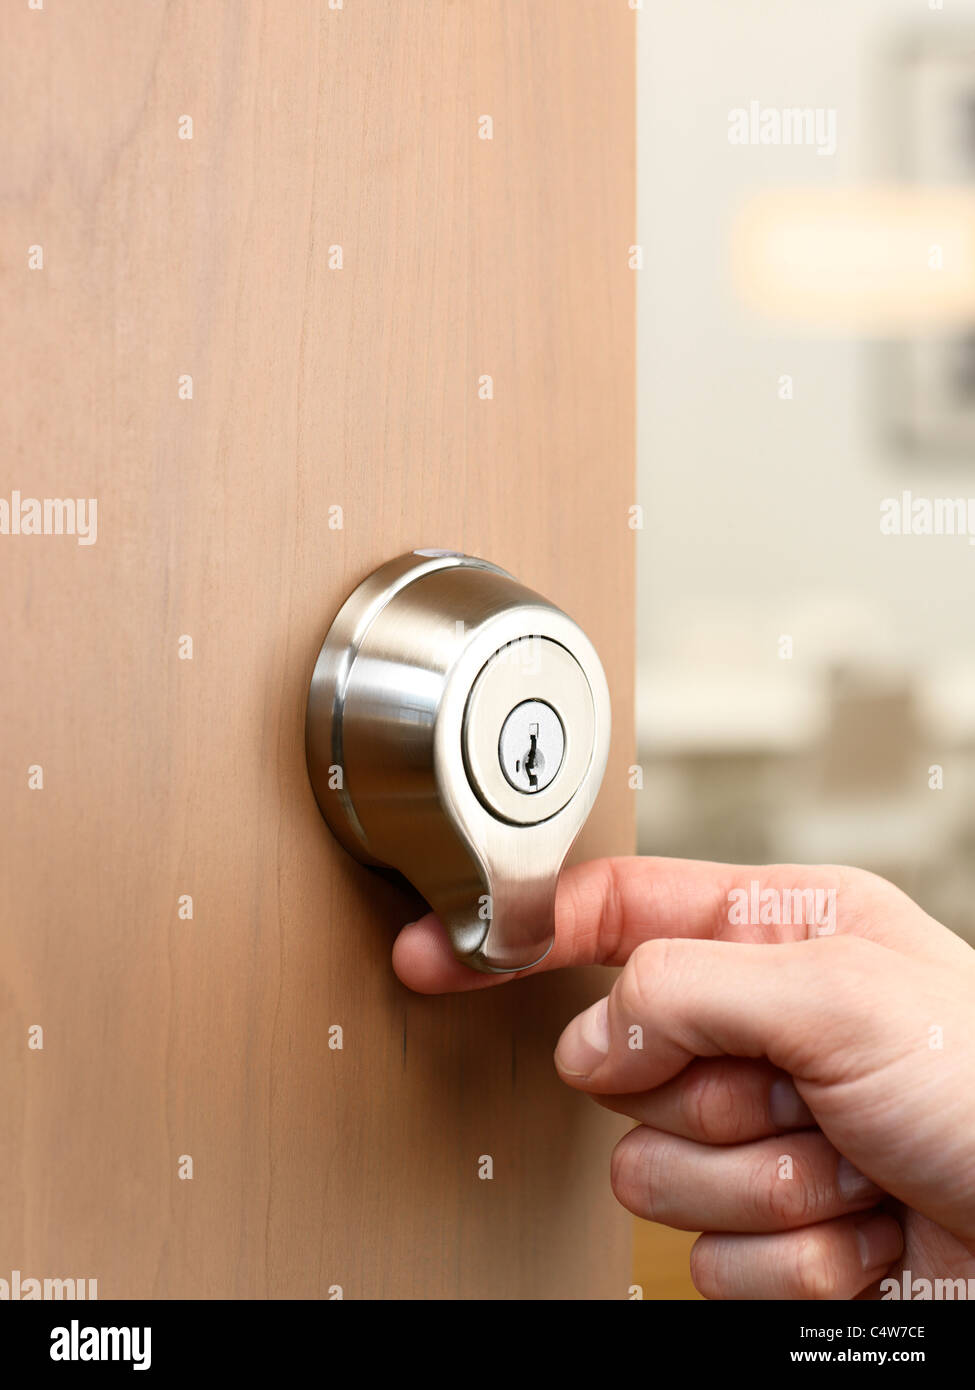 Lock with Fingerprint Recognition Stock Photo